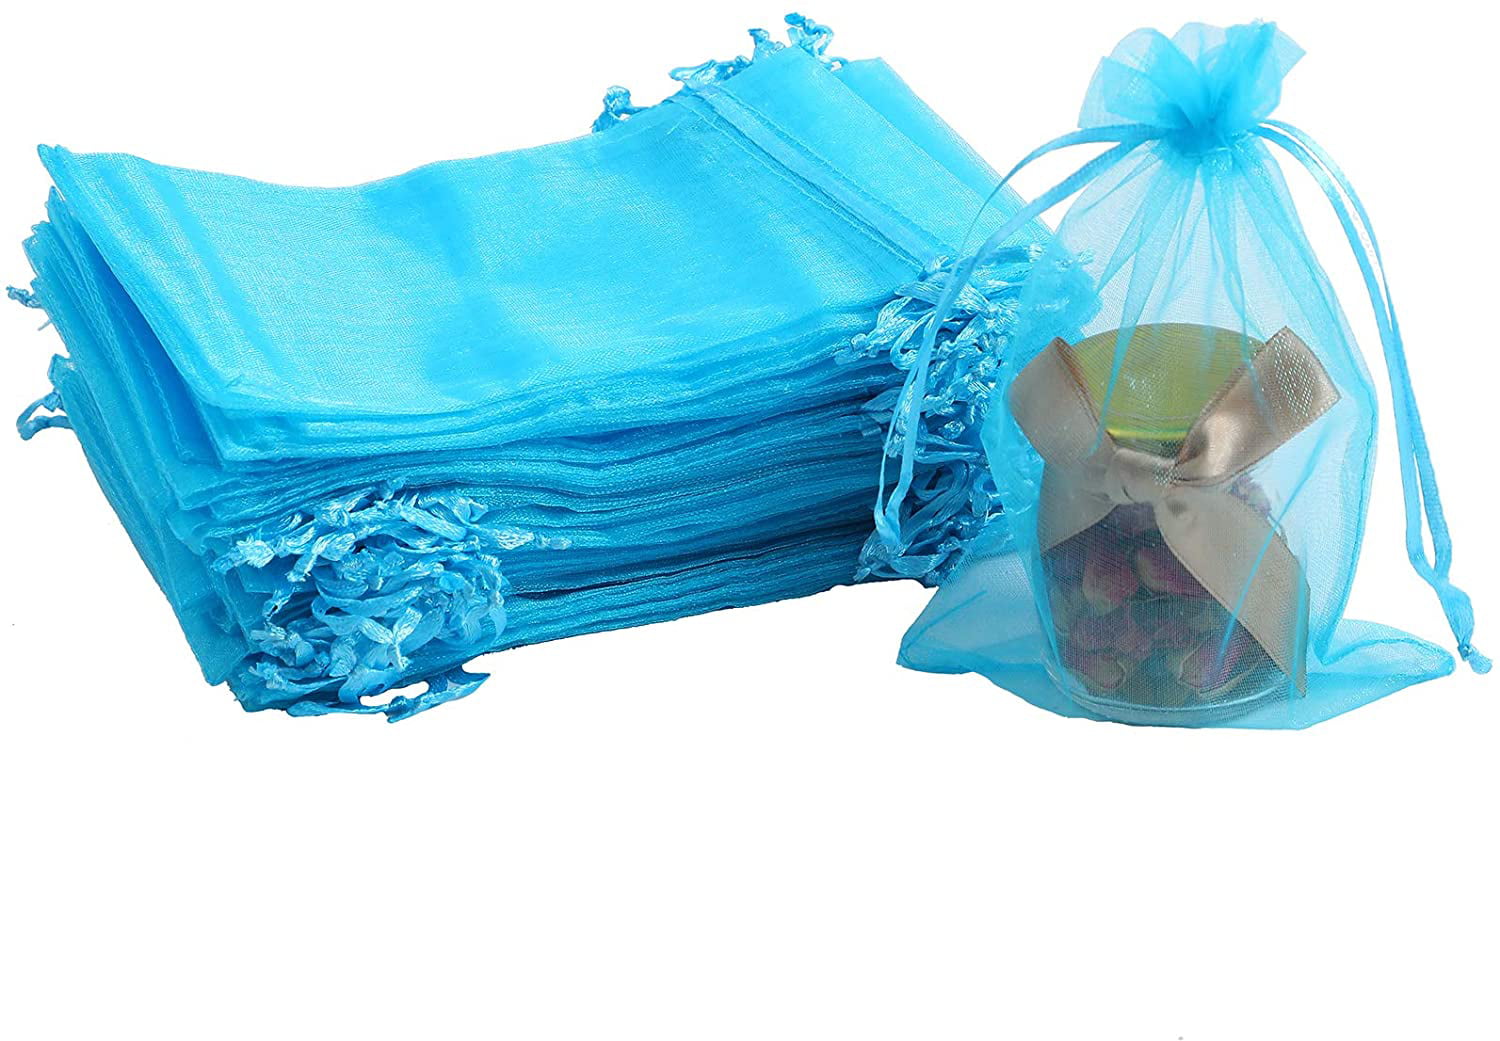 100 x Organza Gift Bags Wedding Festival Party Sheer Candy Bag Jewelry Pouches 